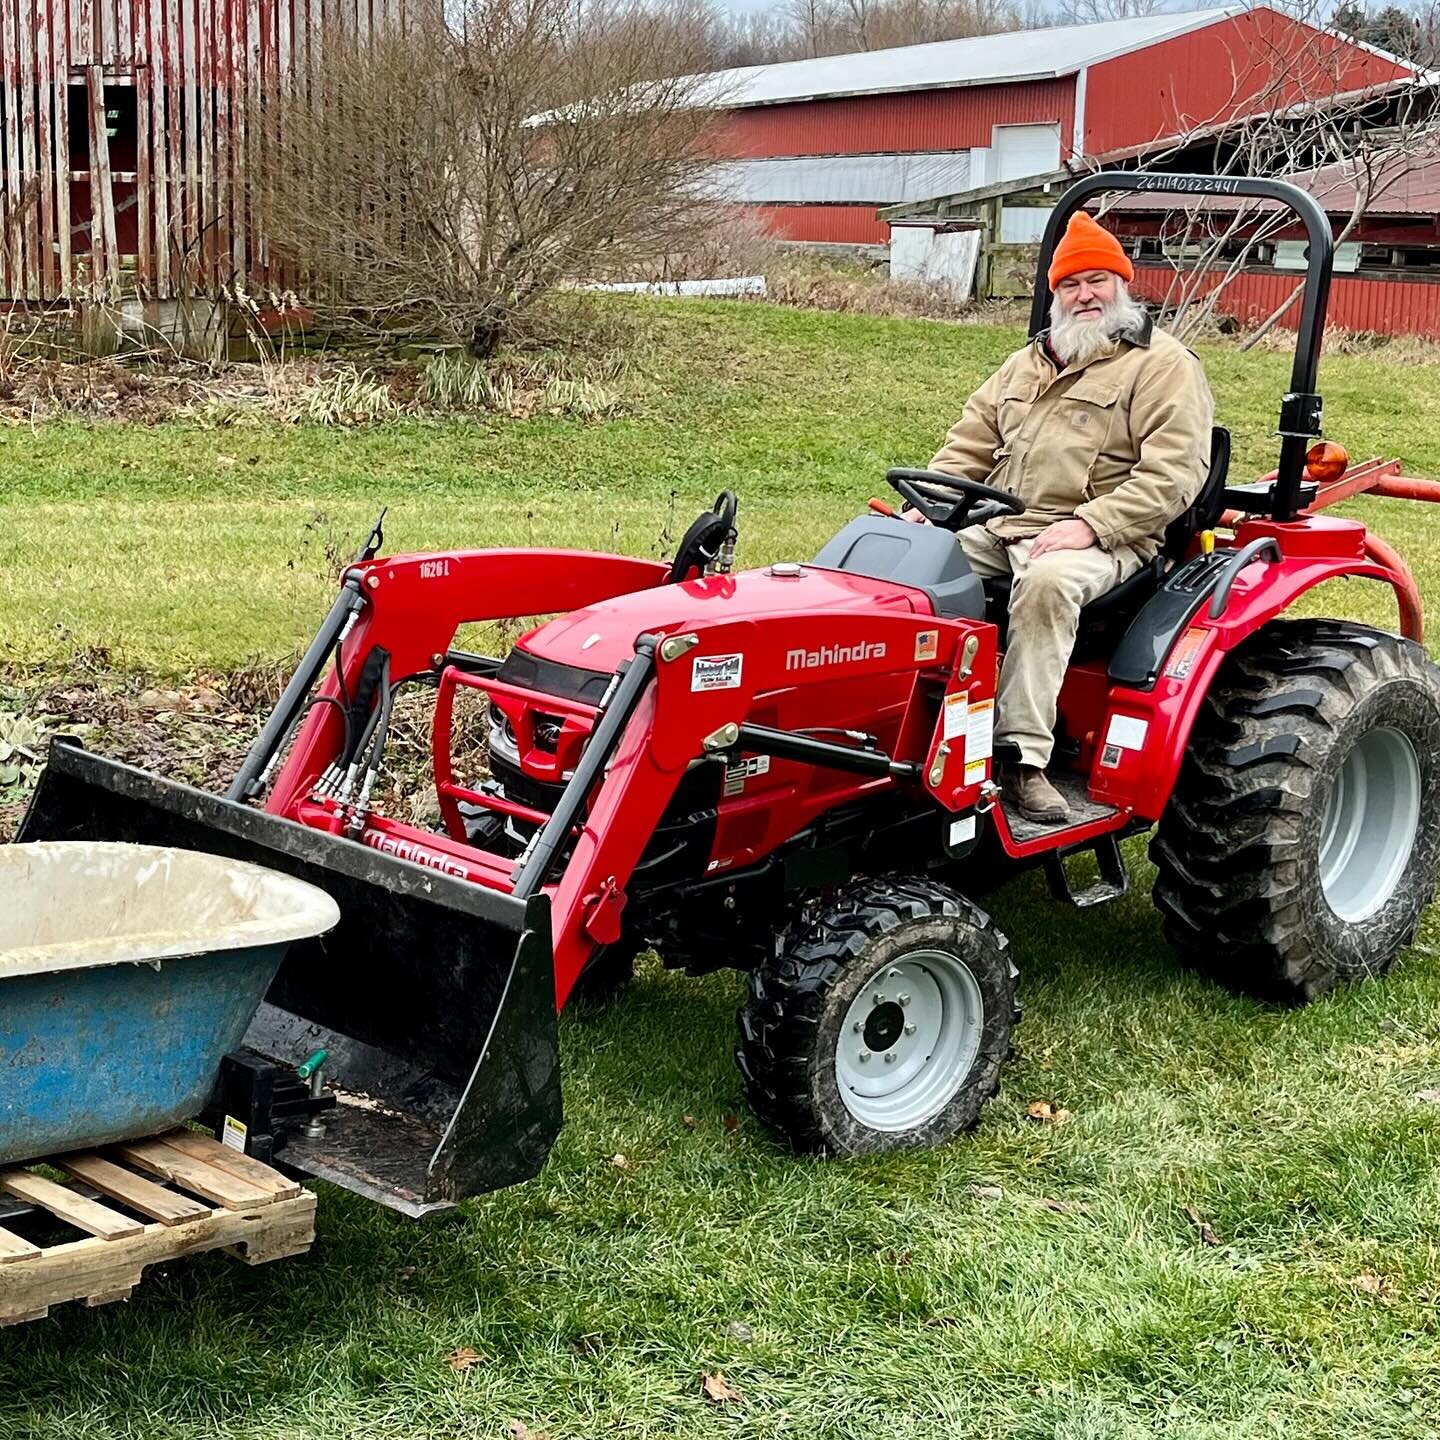 Guess what @nyciderco got for Christmas? No, not an old bathtub! We got a tractor that actually runs! We&rsquo;re very excited. And now that harvest is over and the slow winter months are upon us, there&rsquo;s time for a break and time to do all tho